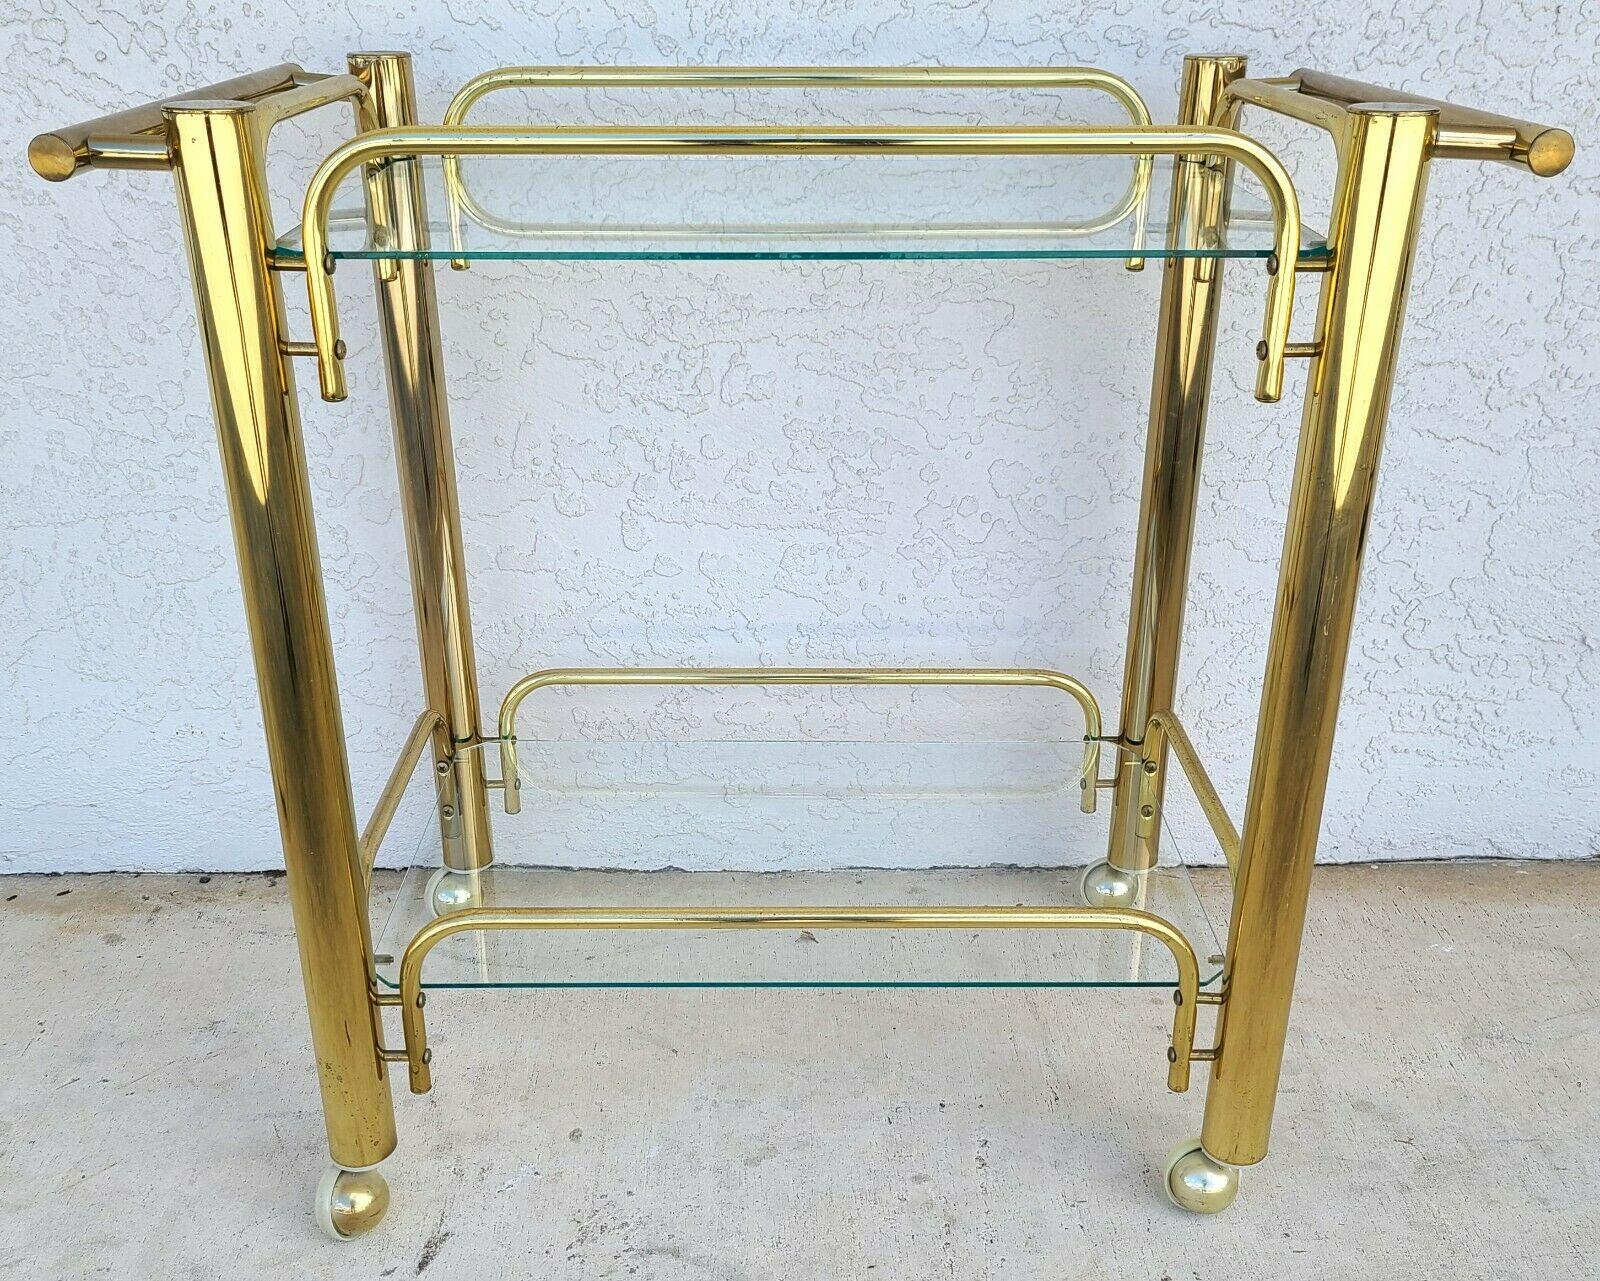 For full item description be sure to click on CONTINUE READING at the bottom of this listing.

Offering one of our recent palm beach estate fine furniture acquisitions of a vintage brass & glass rolling bar serving cart

Approximate measurements